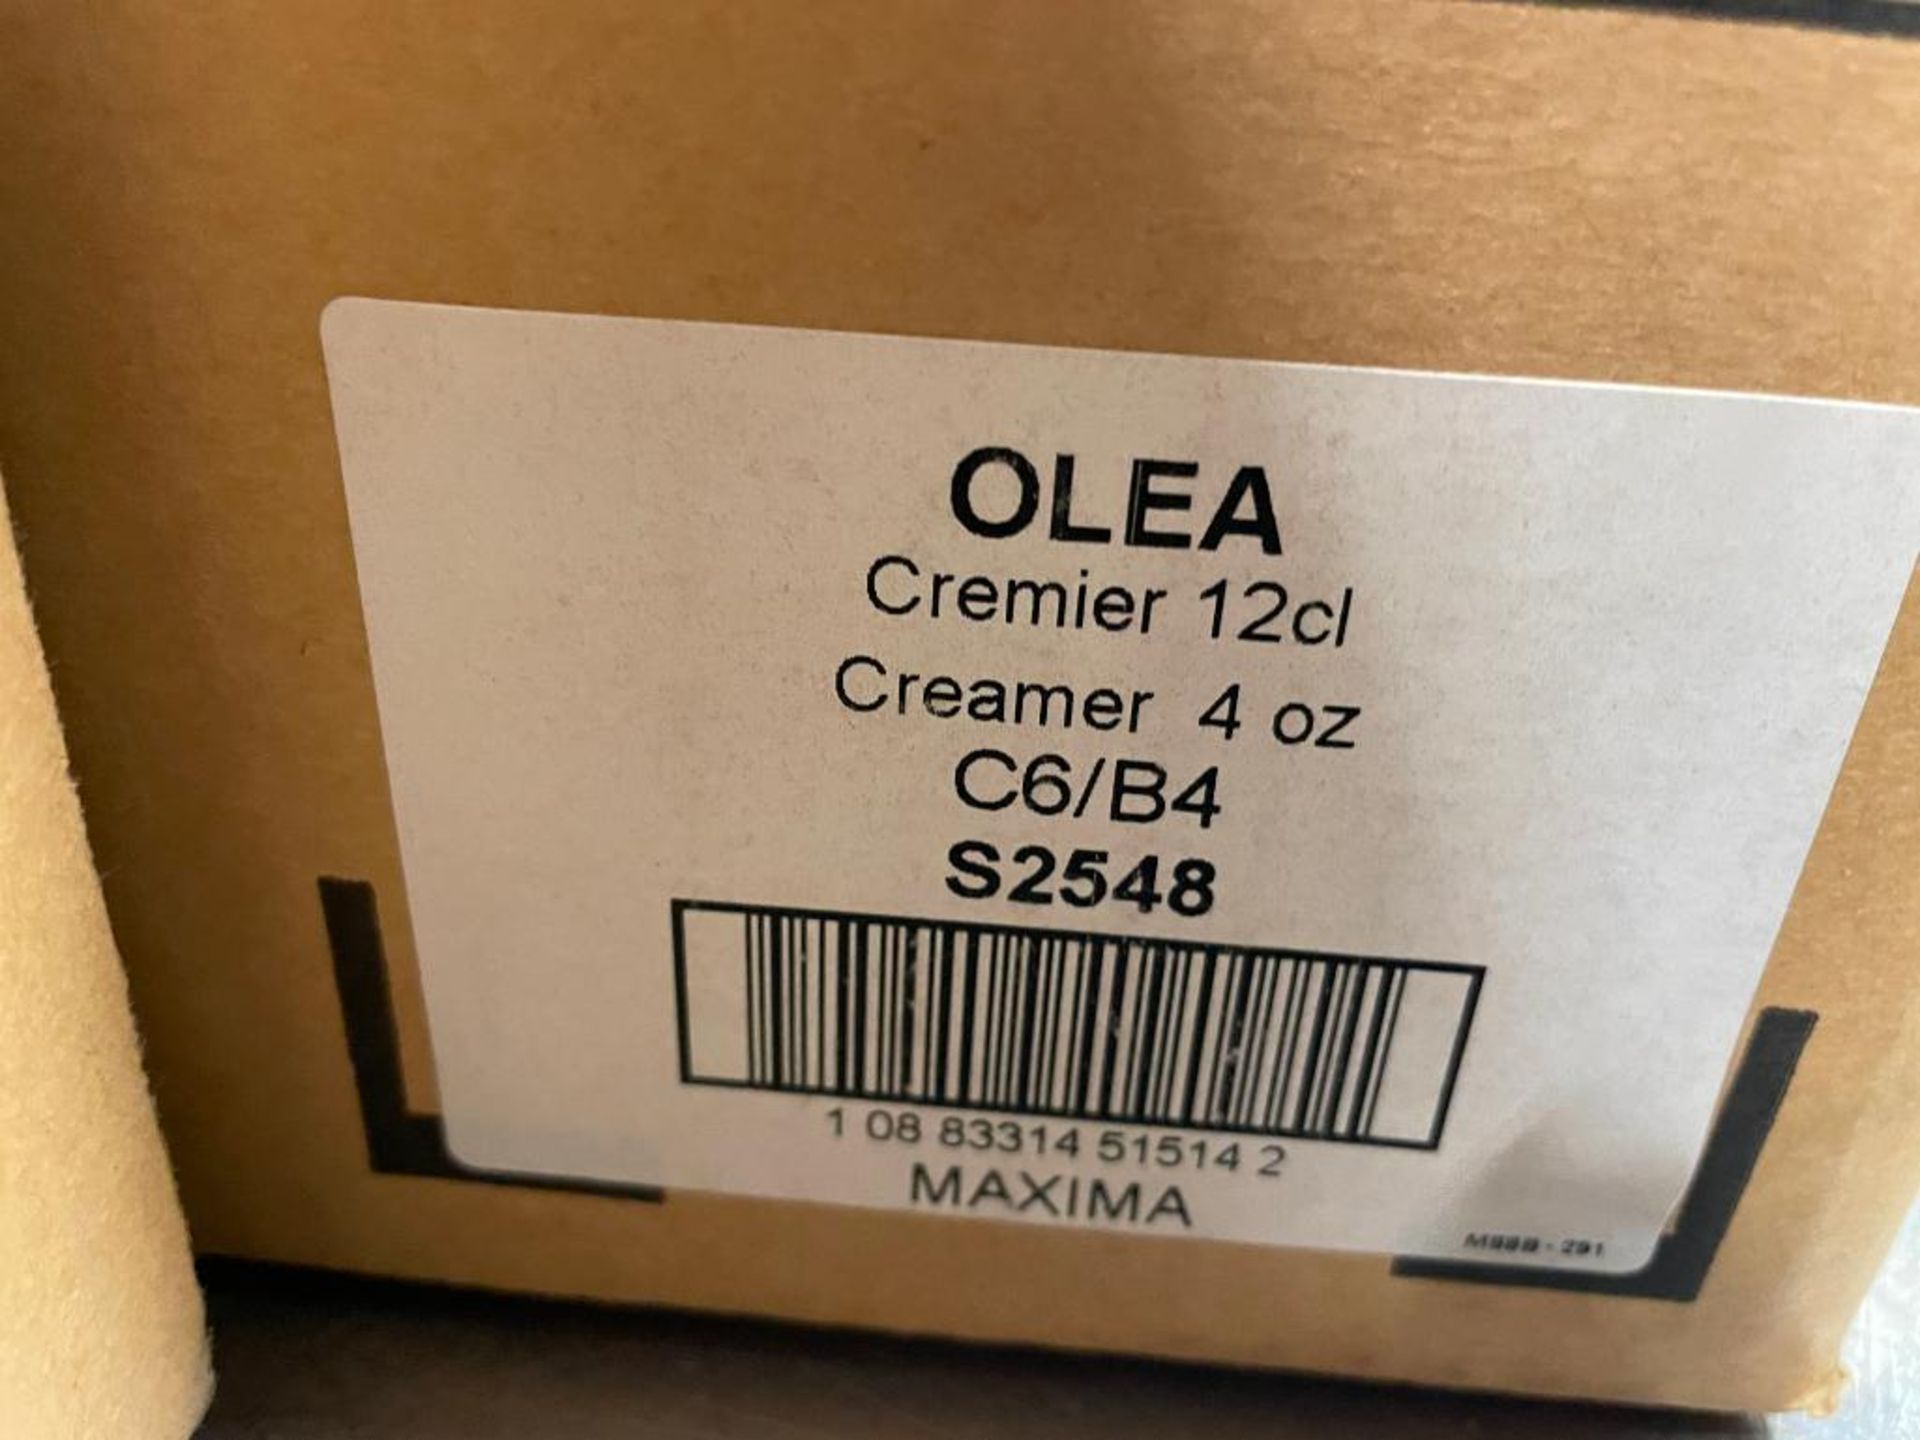 2 CASES OF OLEA 4 OZ. CREAMERS, CHEF & SOMMELIER S2548, 24/CASE - NEW - Image 3 of 4